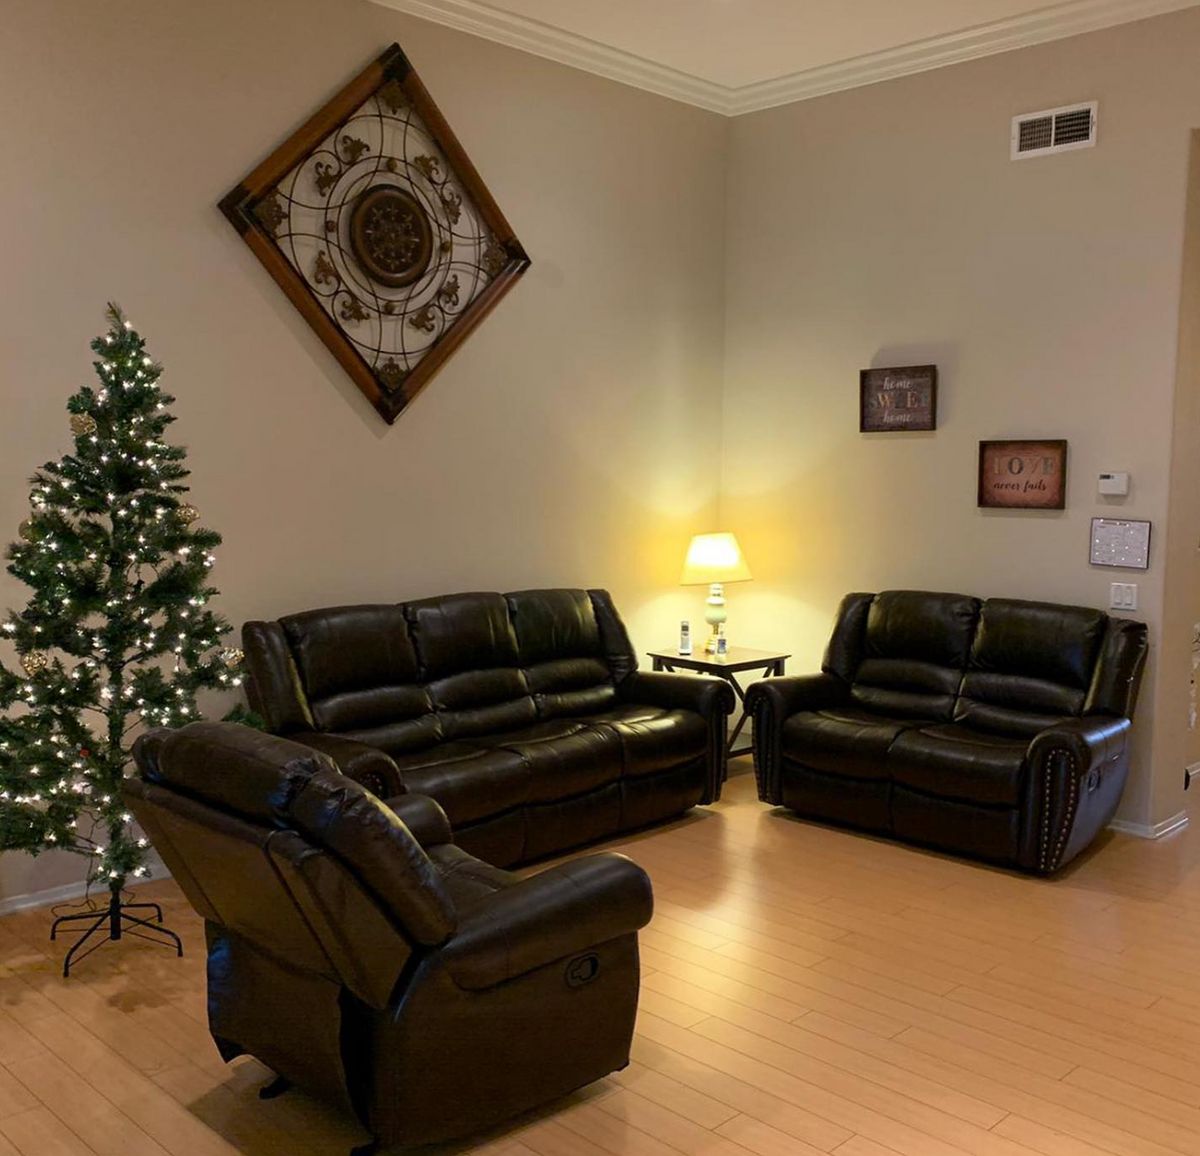 Senior living room at Mira Loma Senior Care with comfortable furniture and art decor.